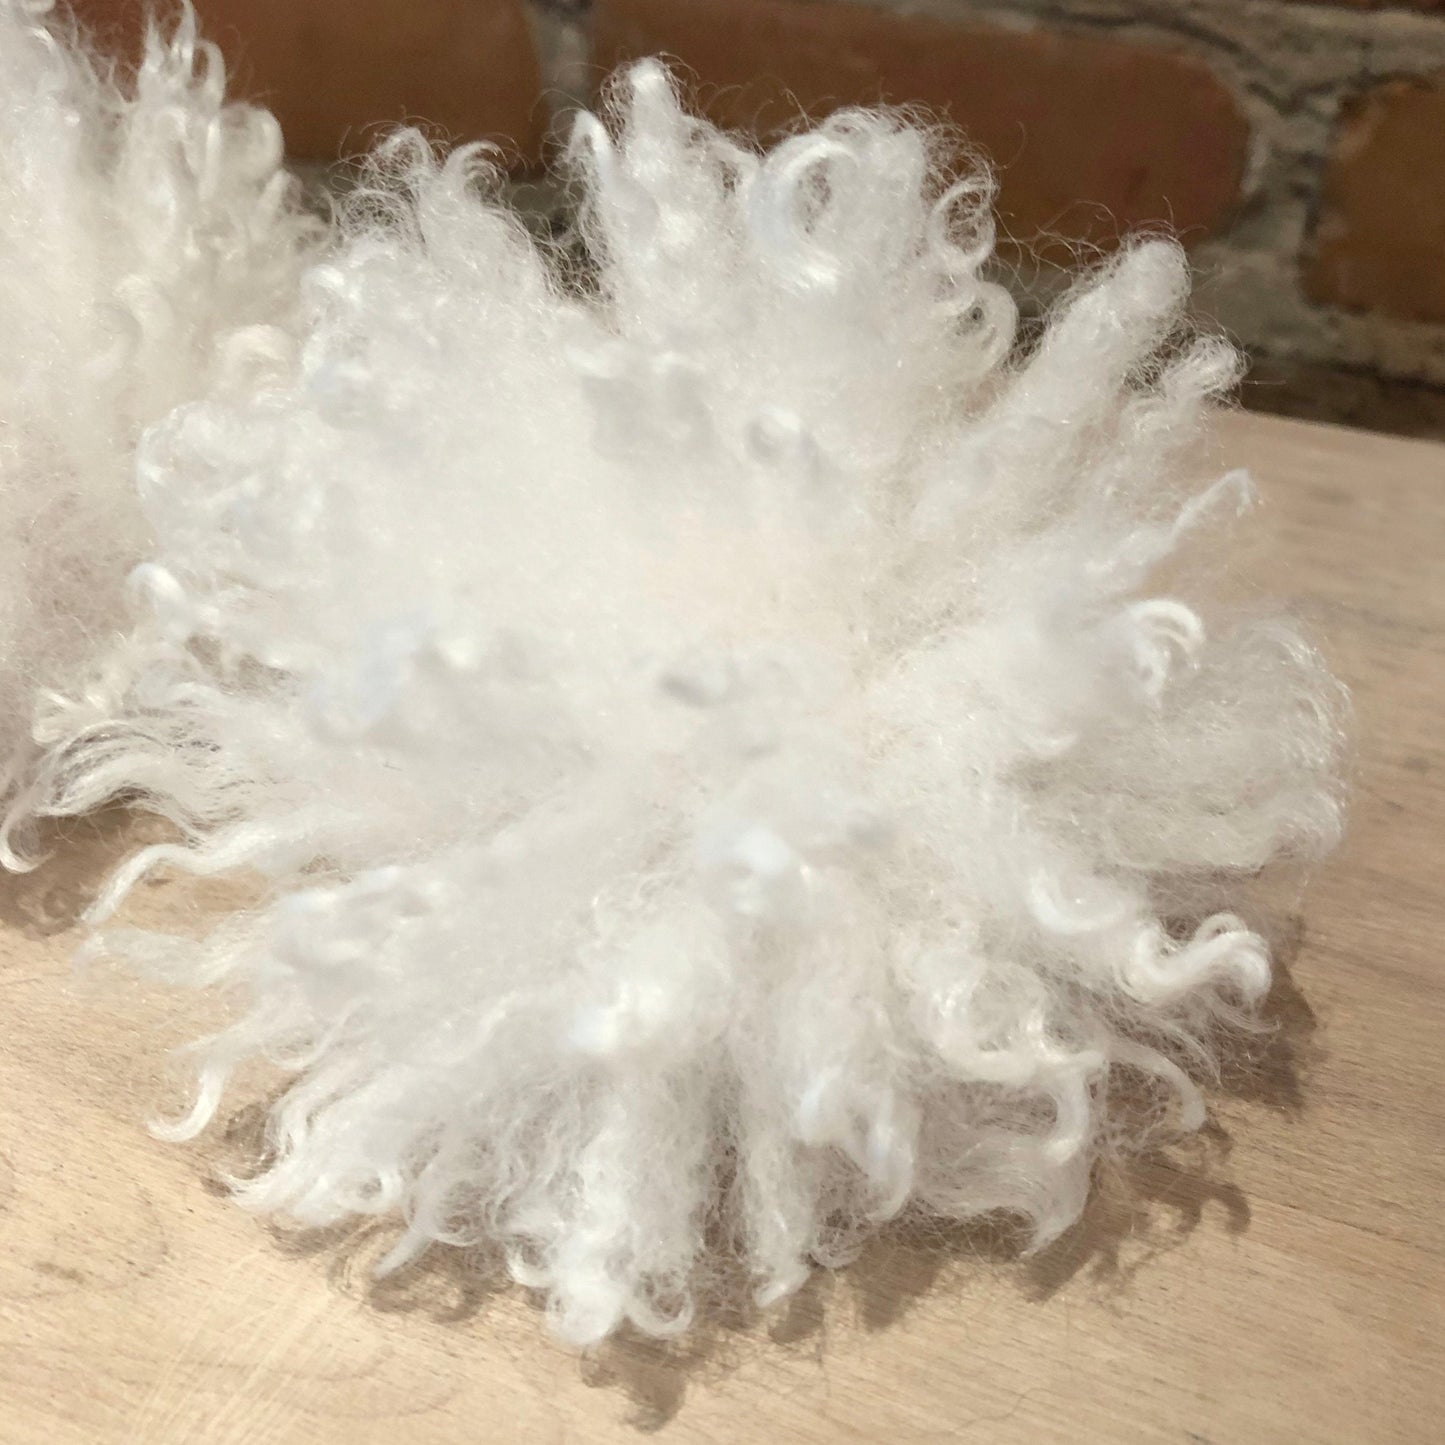 Pure White Curly Faux Fur Pom Pom for Crafting Projects